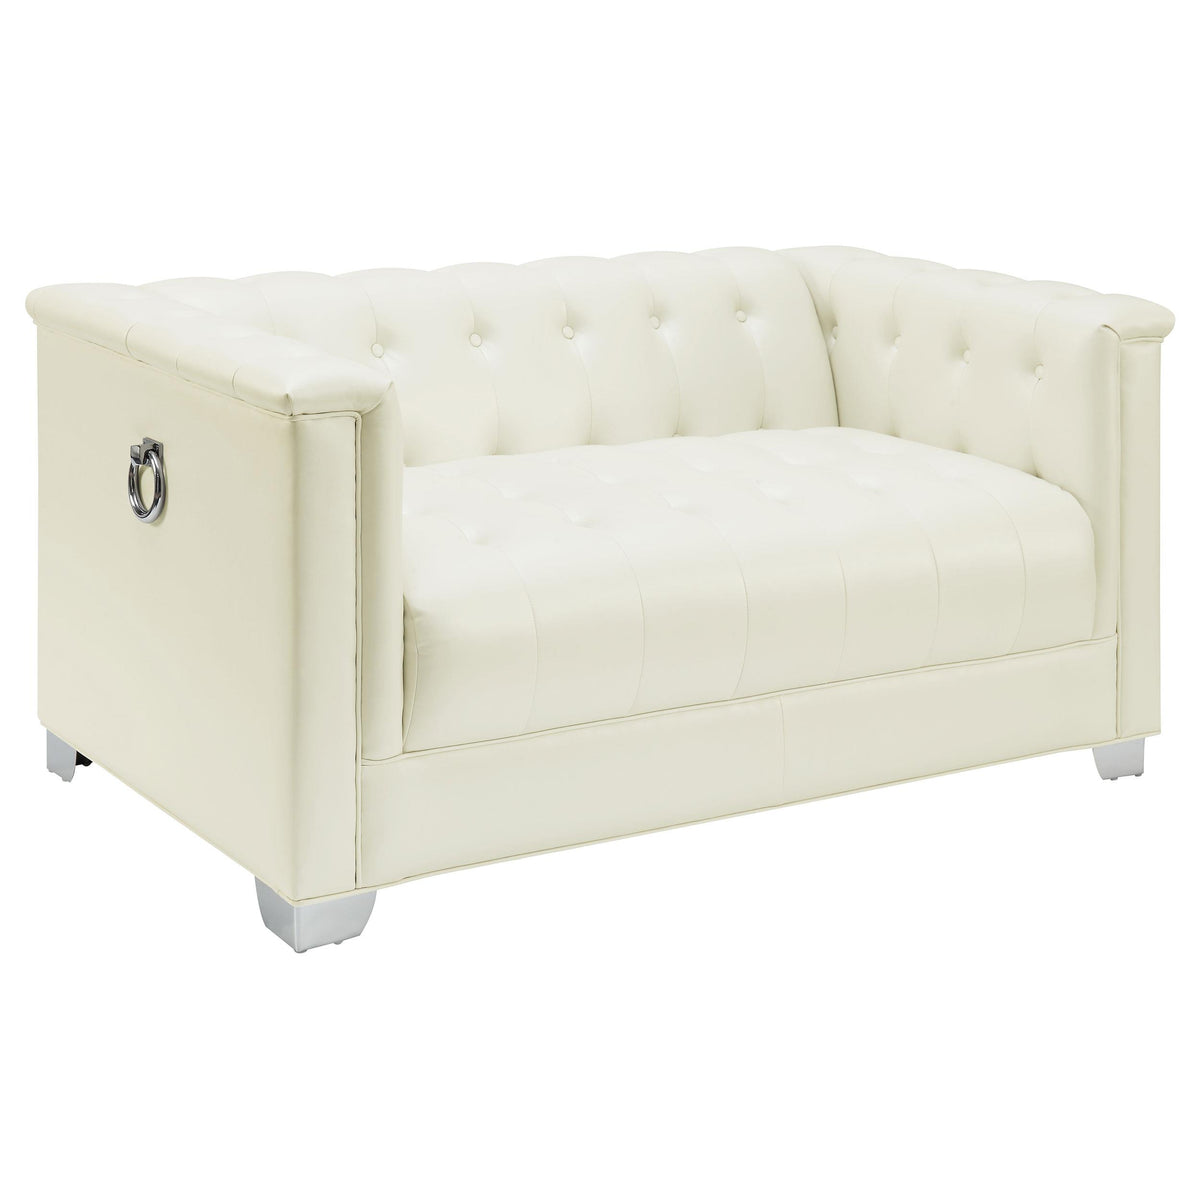 Chaviano Tufted Upholstered Loveseat Pearl White Chaviano Tufted Upholstered Loveseat Pearl White Half Price Furniture